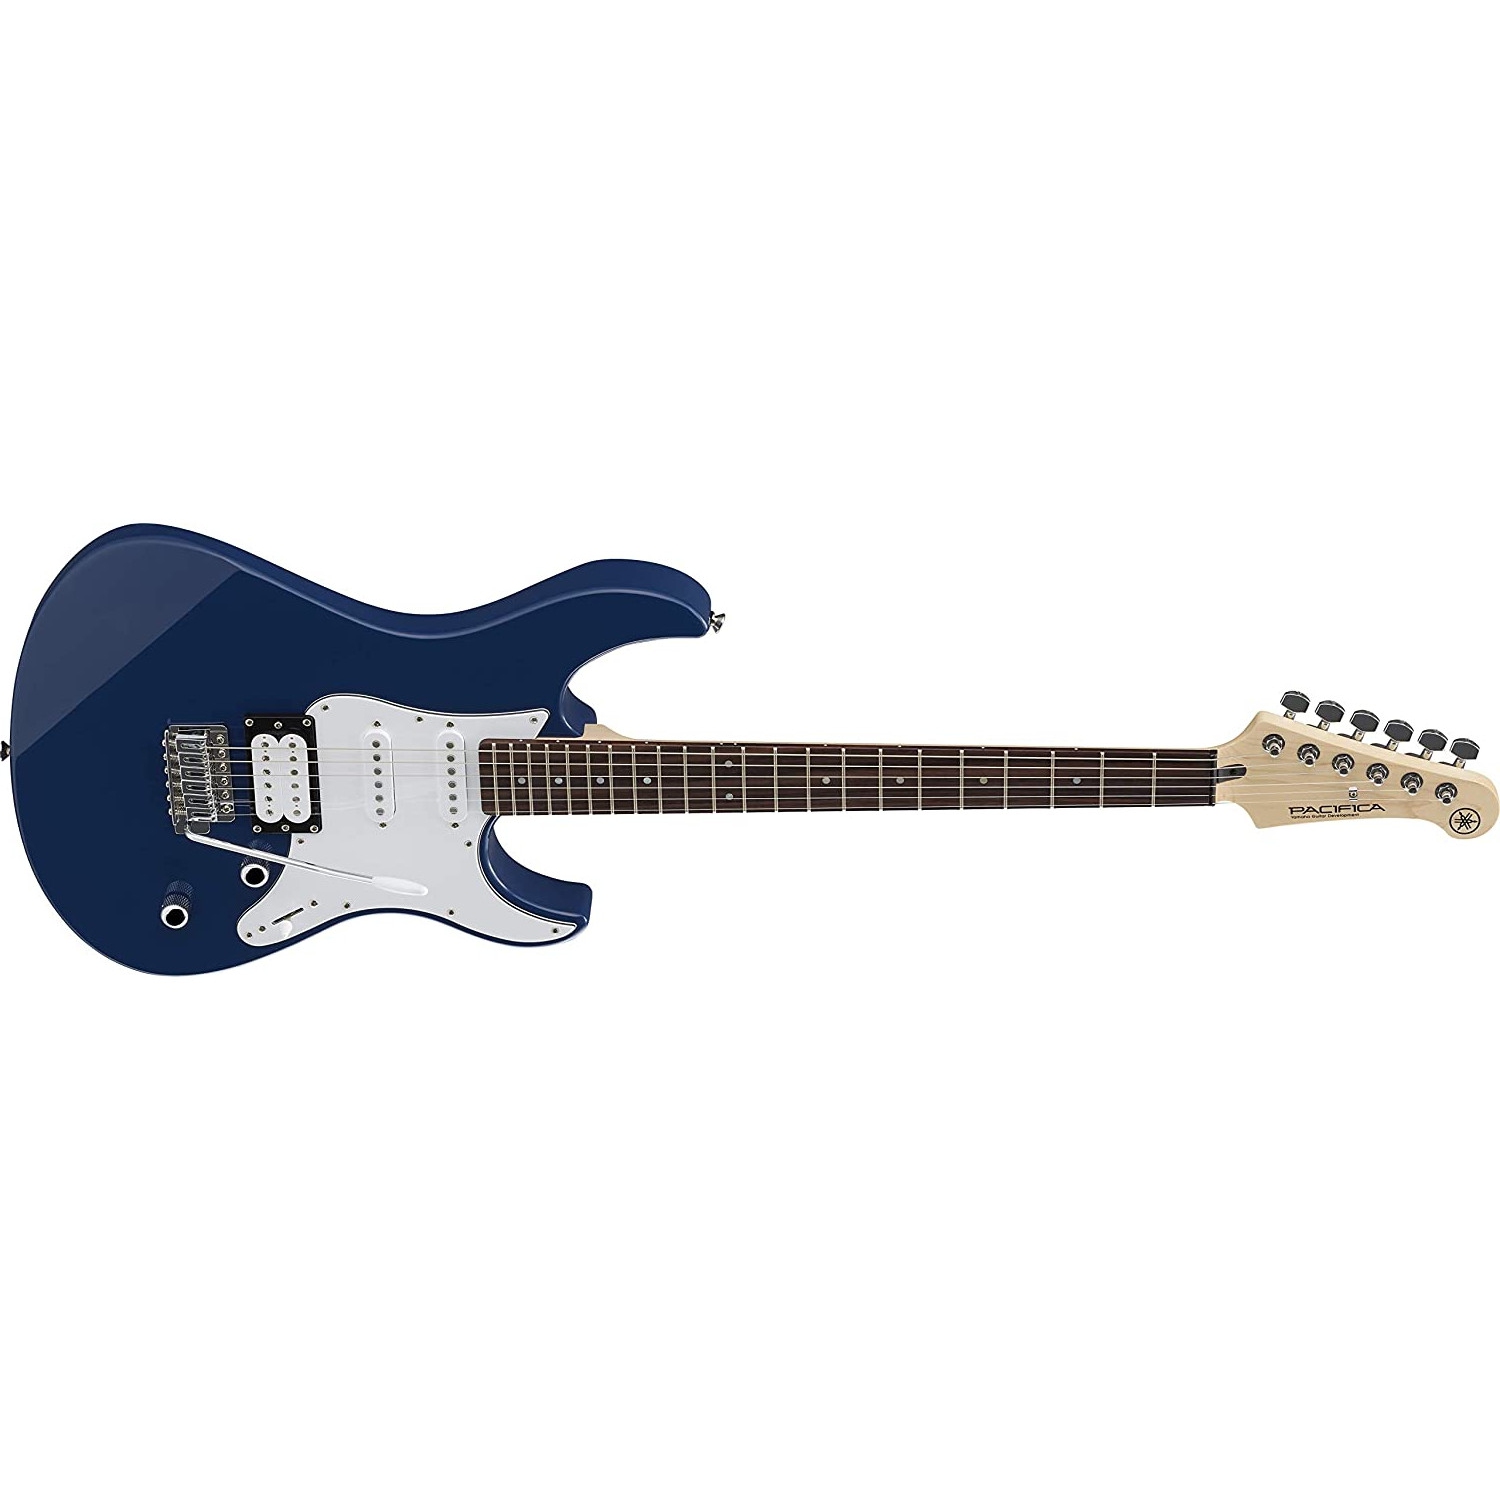 Yamaha Pacifica 112V Electric Guitar - United Blue | Best Buy Canada